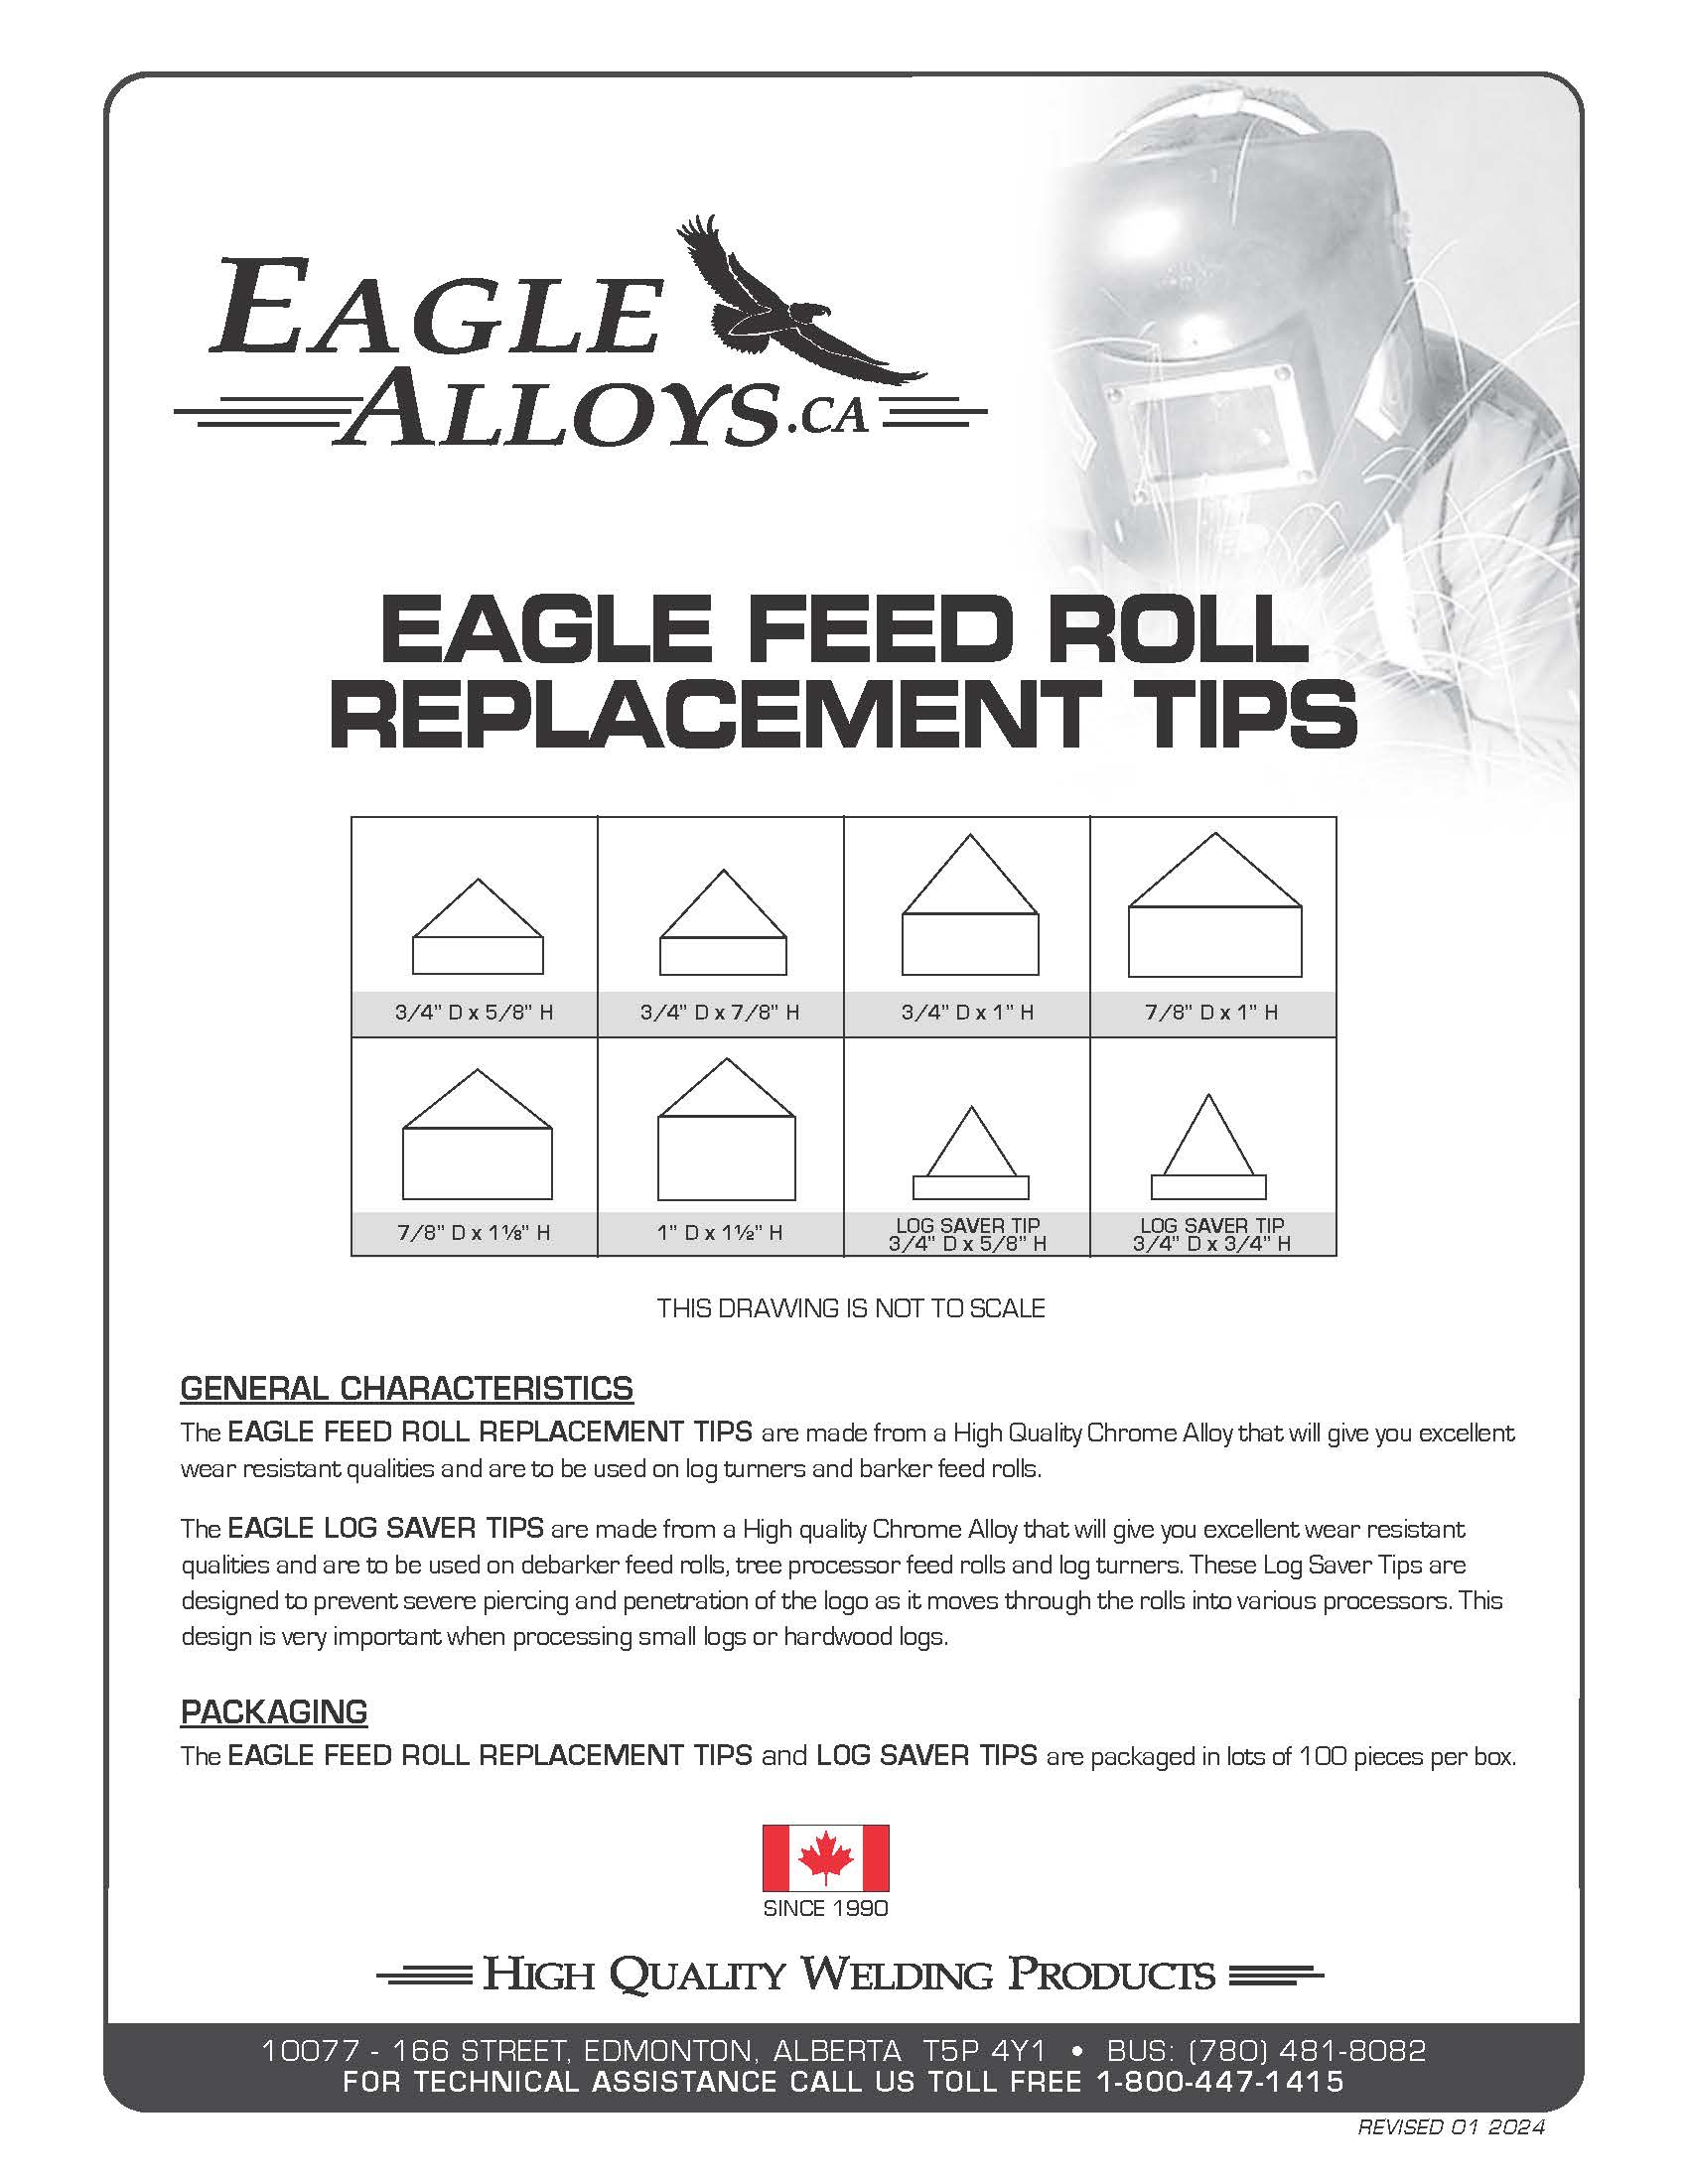 EAGLE FEED ROLL REPLACEMENT TIPS